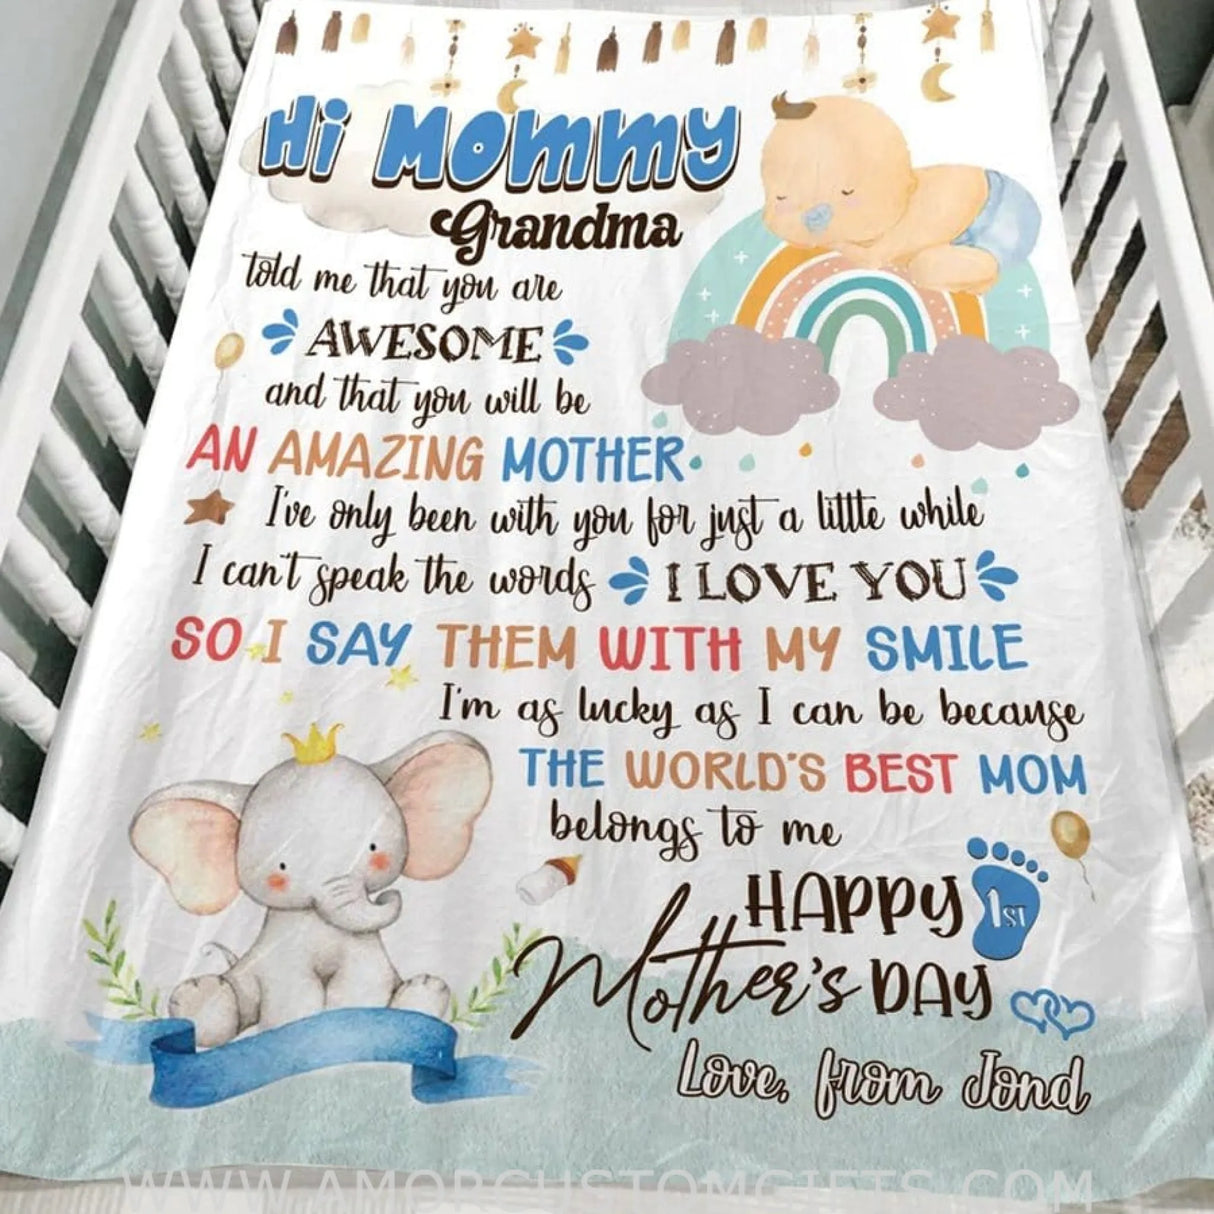 Blankets USA MADE Personalized baby blanket, hi mommy, new born gift, first mother's day gift, personalized baby blanket, custom fleece blanket